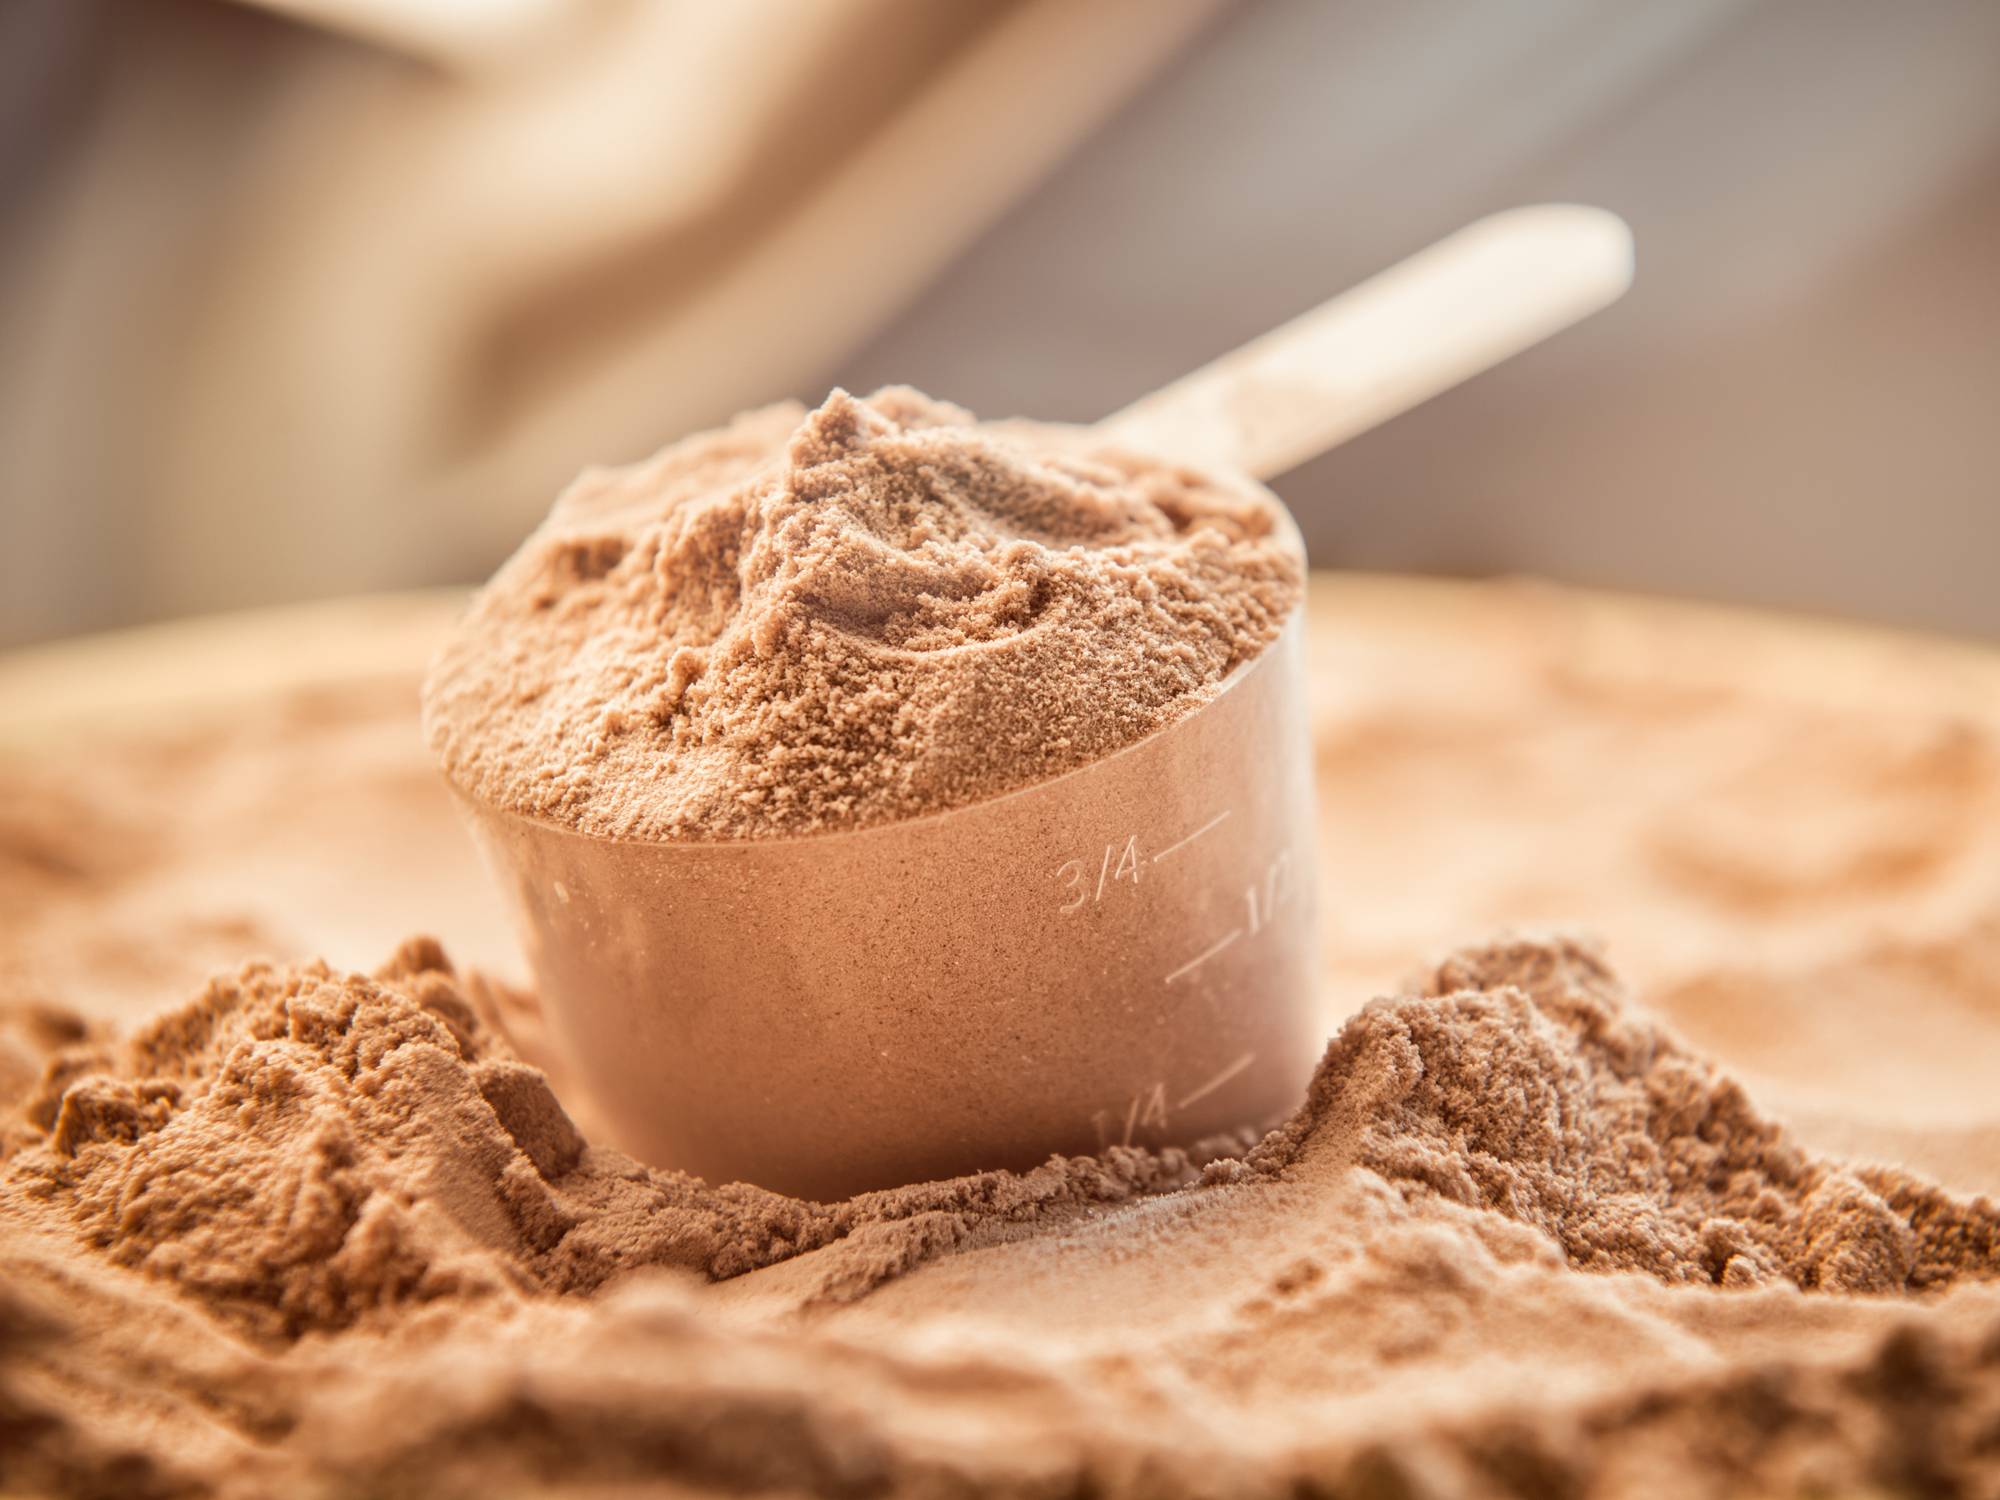 Whey is the way to muscle out stroke and heart disease risk